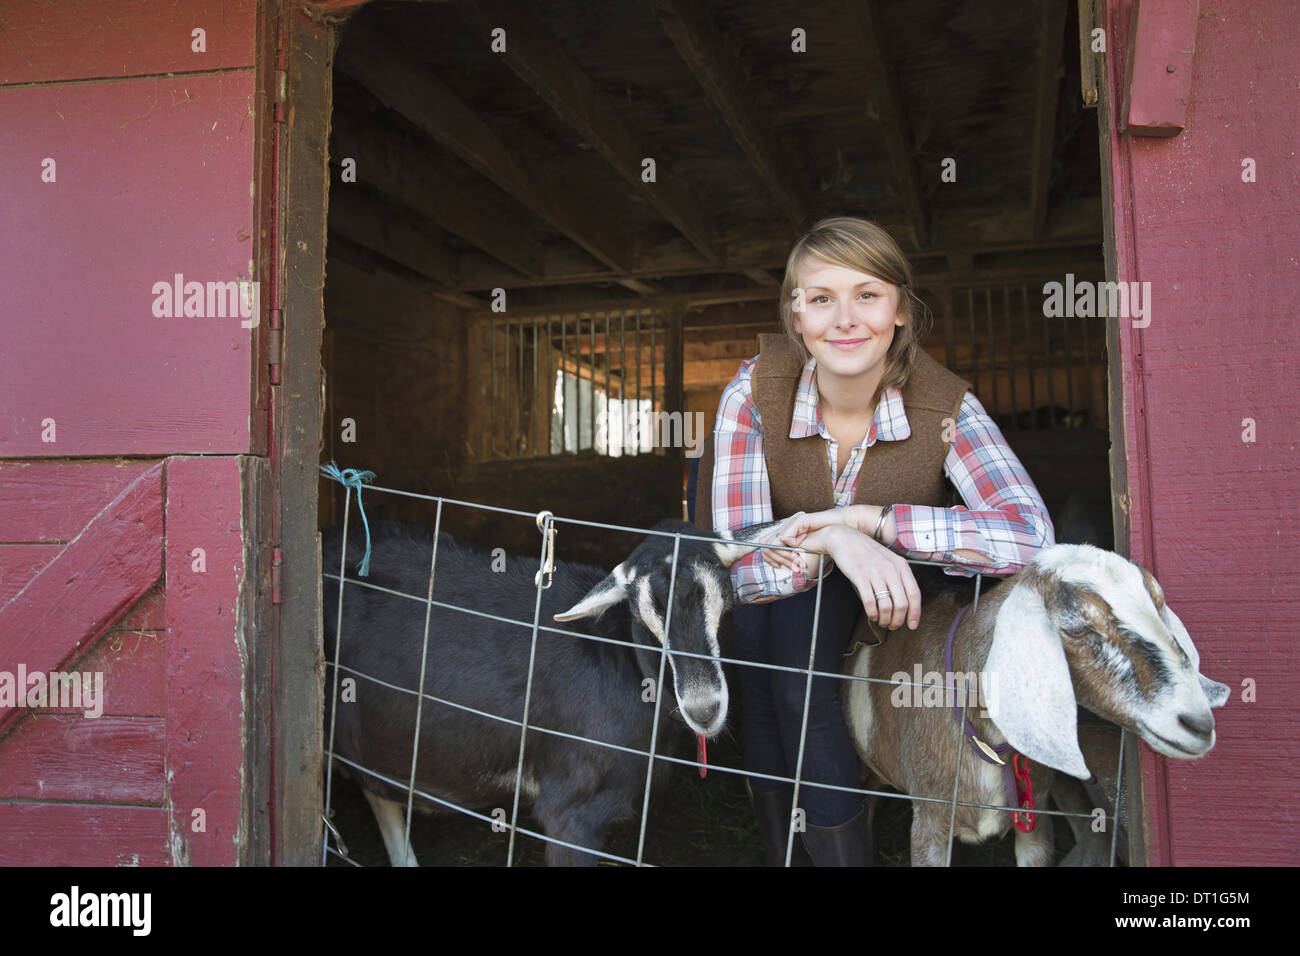 A goat farm A young girl leaning on the barrier of the goat shed with two animals peering out Stock Photo